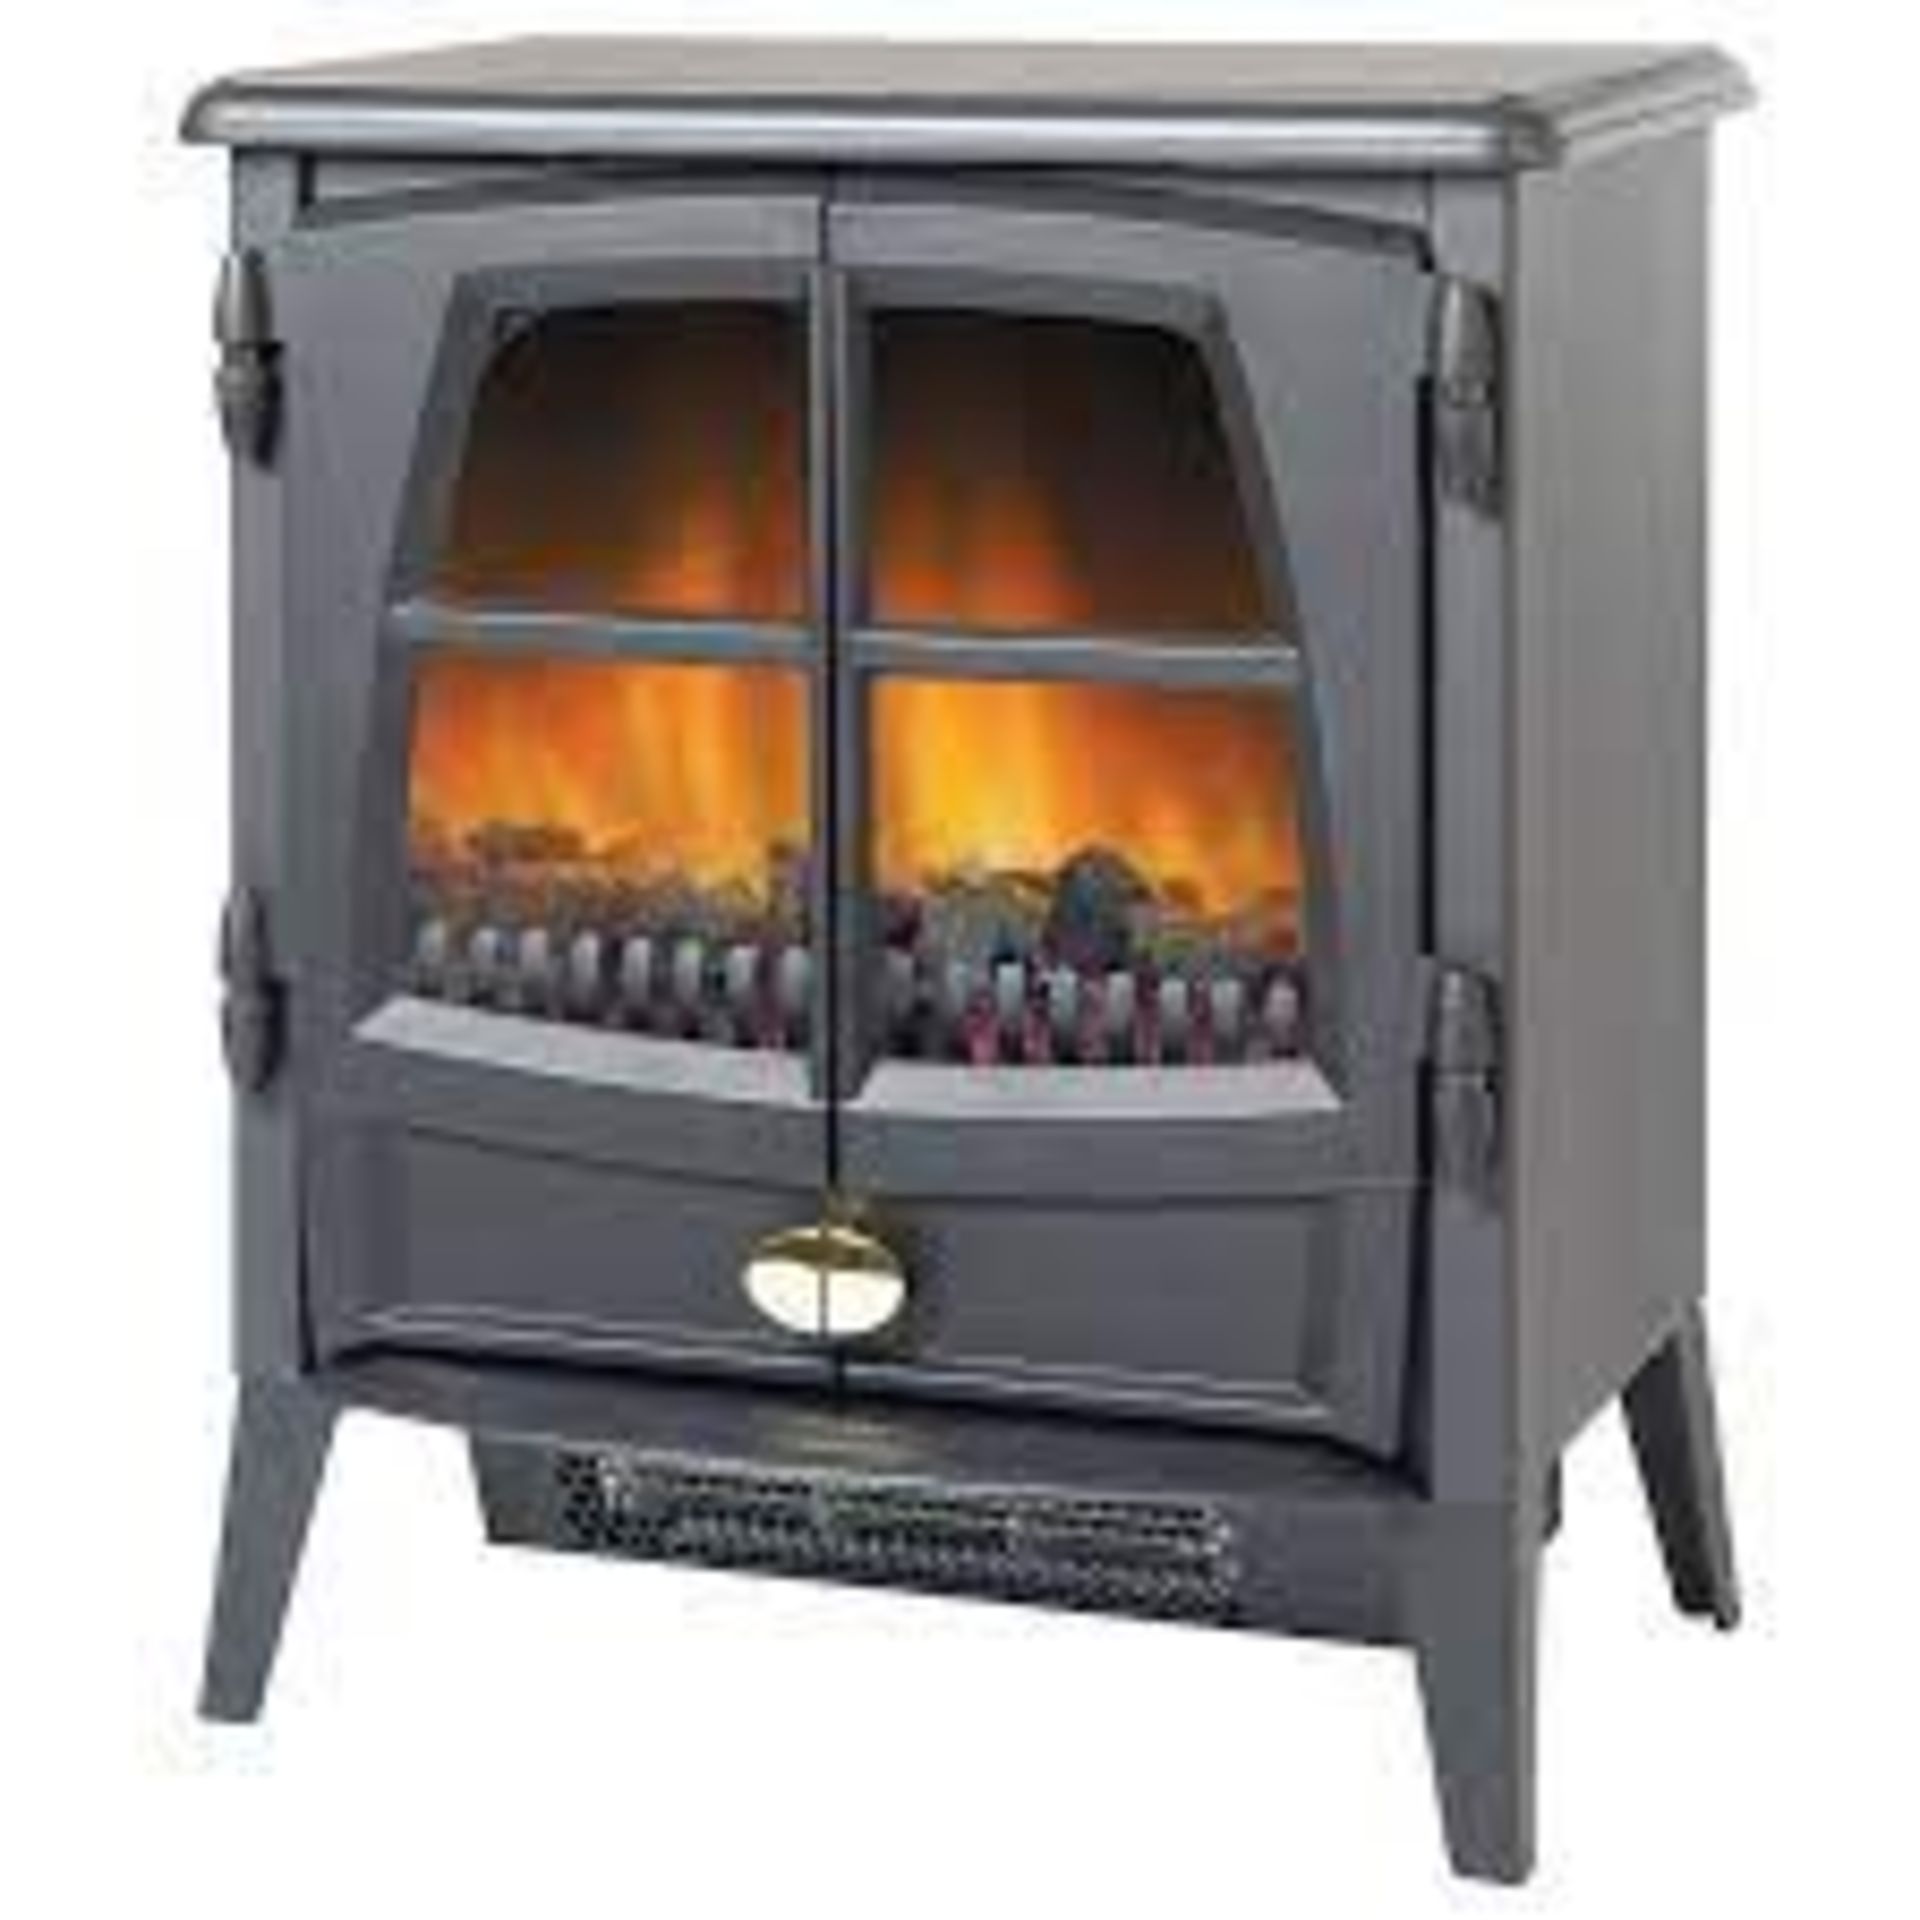 Dimplex Jazz 2kW Black Electric Stove. -ER48. This electric fire features a optiflame flame effect